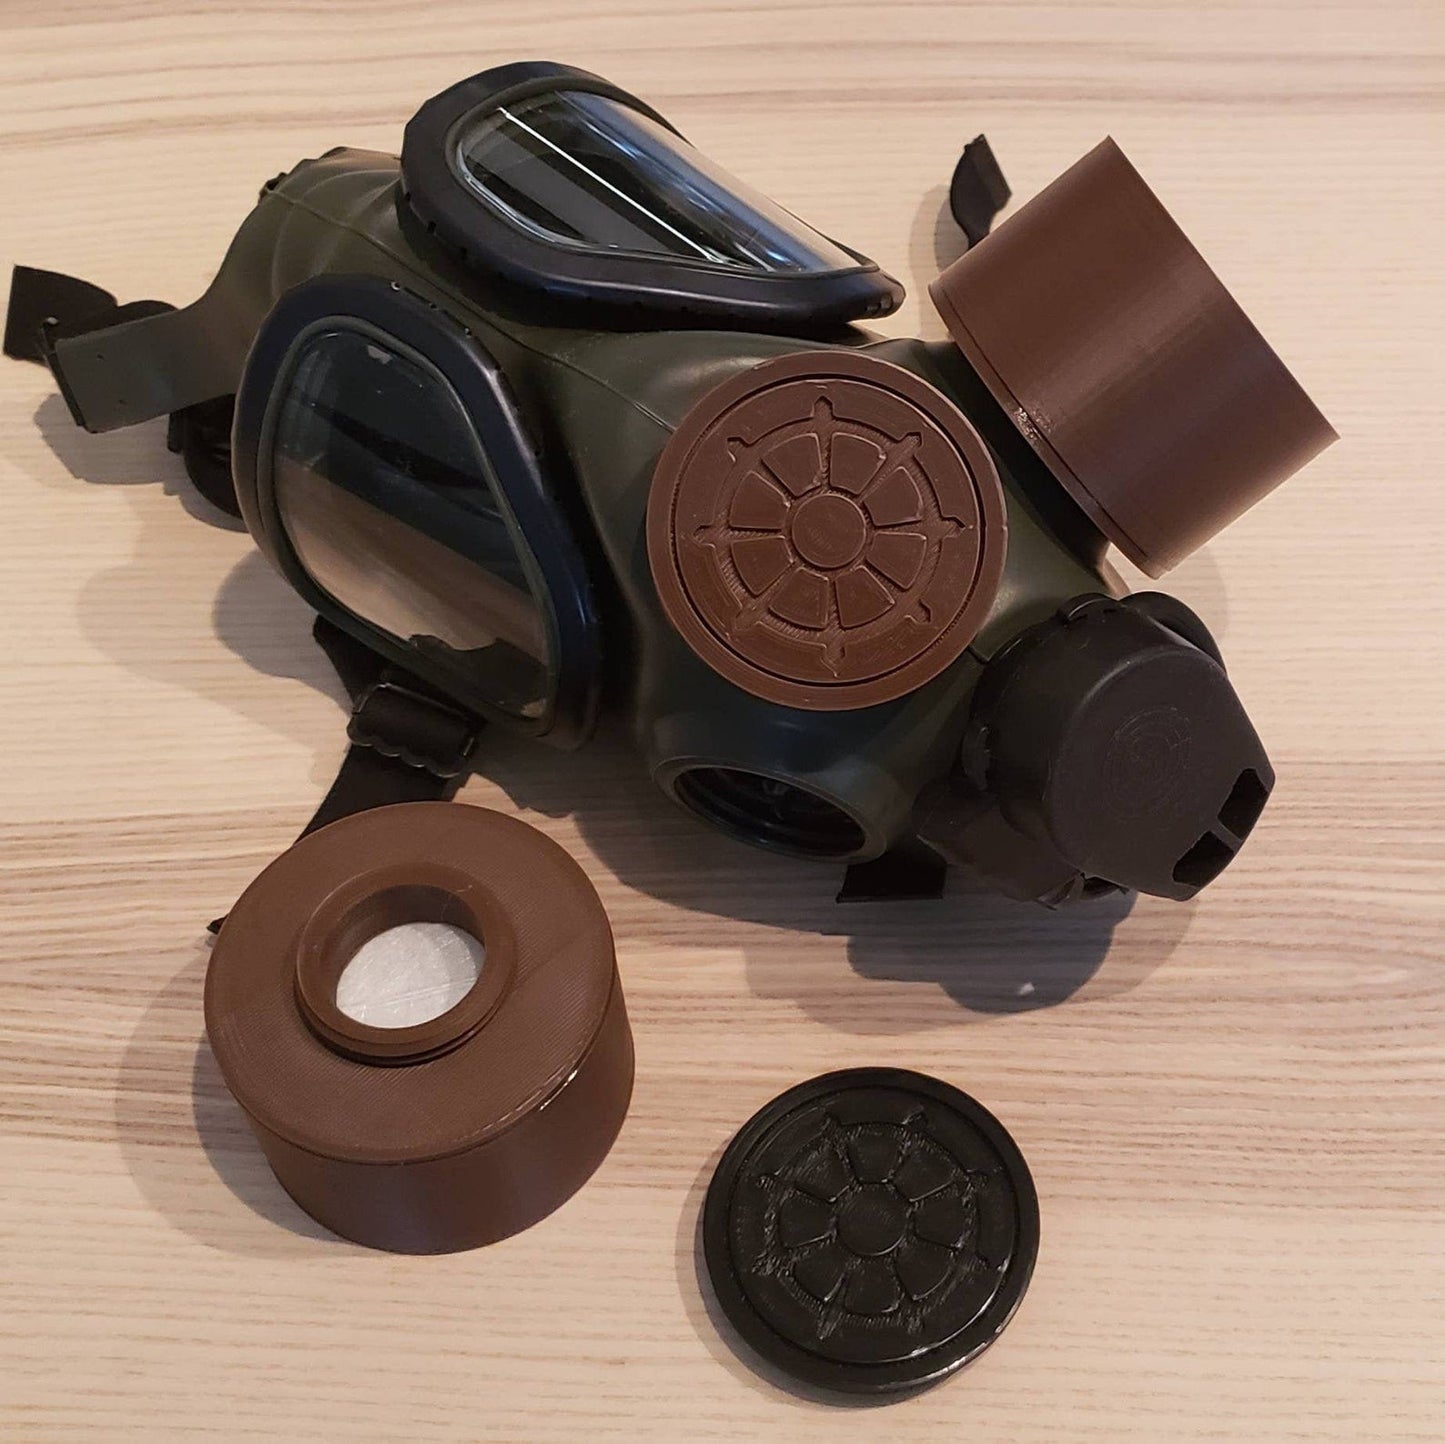 Voice Amp cover for 40mm NATO gas masks - 3D Printed ABS Plastic (canister only) - 3M 2200 mpr (merv13) filter media - m40/42 gas mask